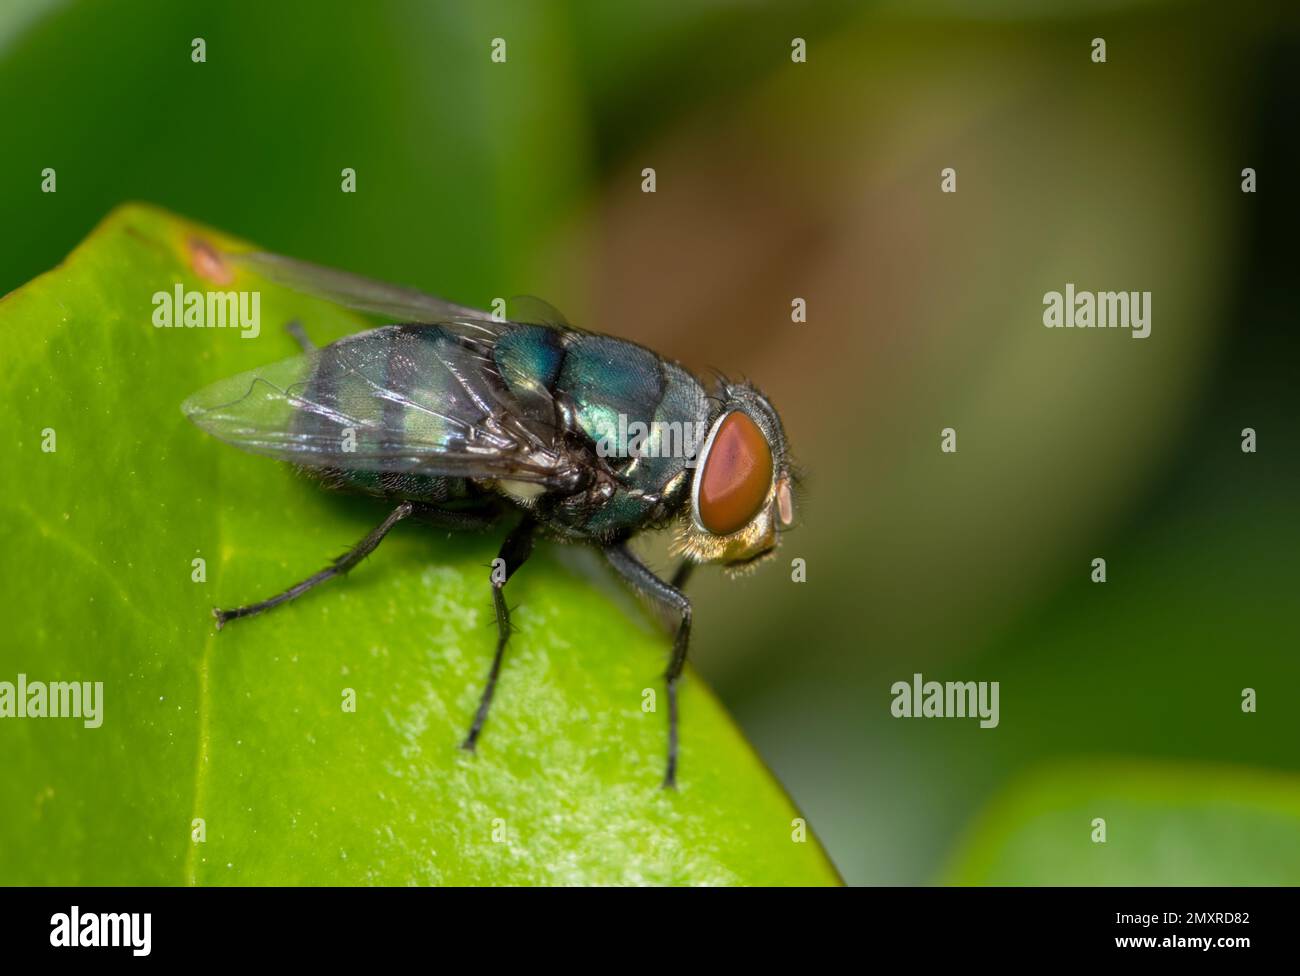 Bluebottle fly (Lucilia sericata) resting on a leaf. Common blowflies that are found worldwide, usually in tropical climates. Stock Photo